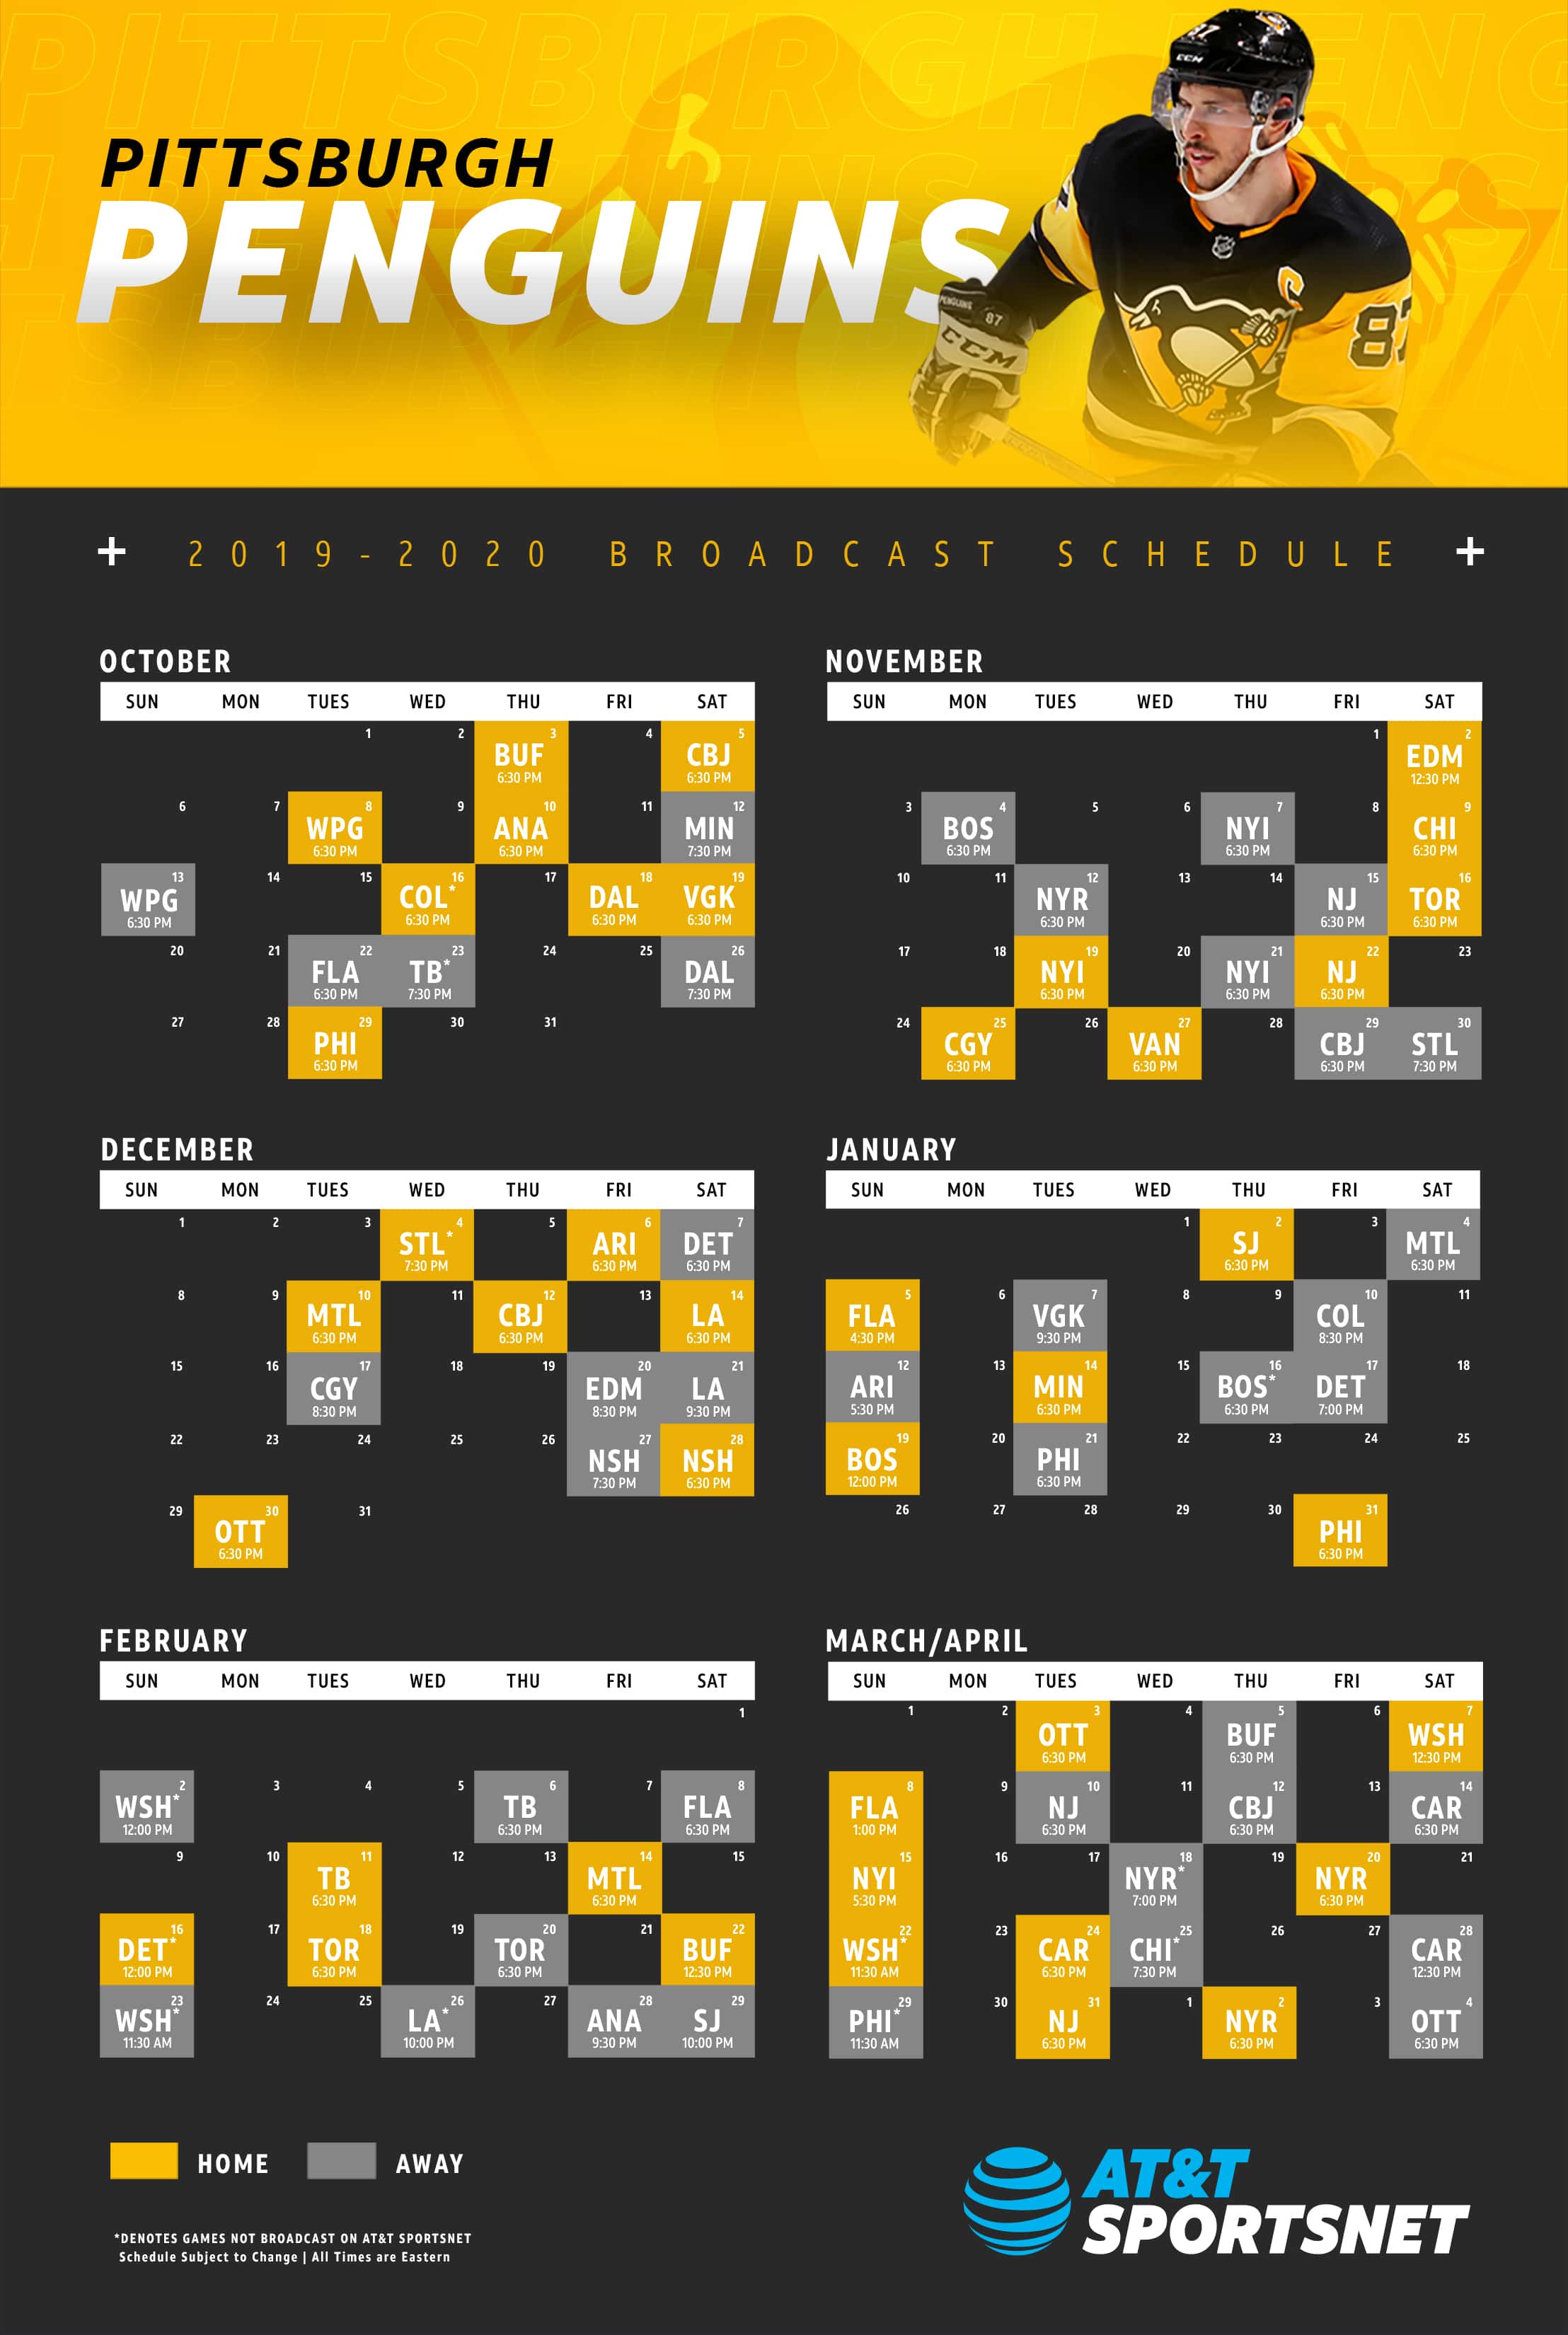 printable-penguins-schedule-2022-printable-world-holiday